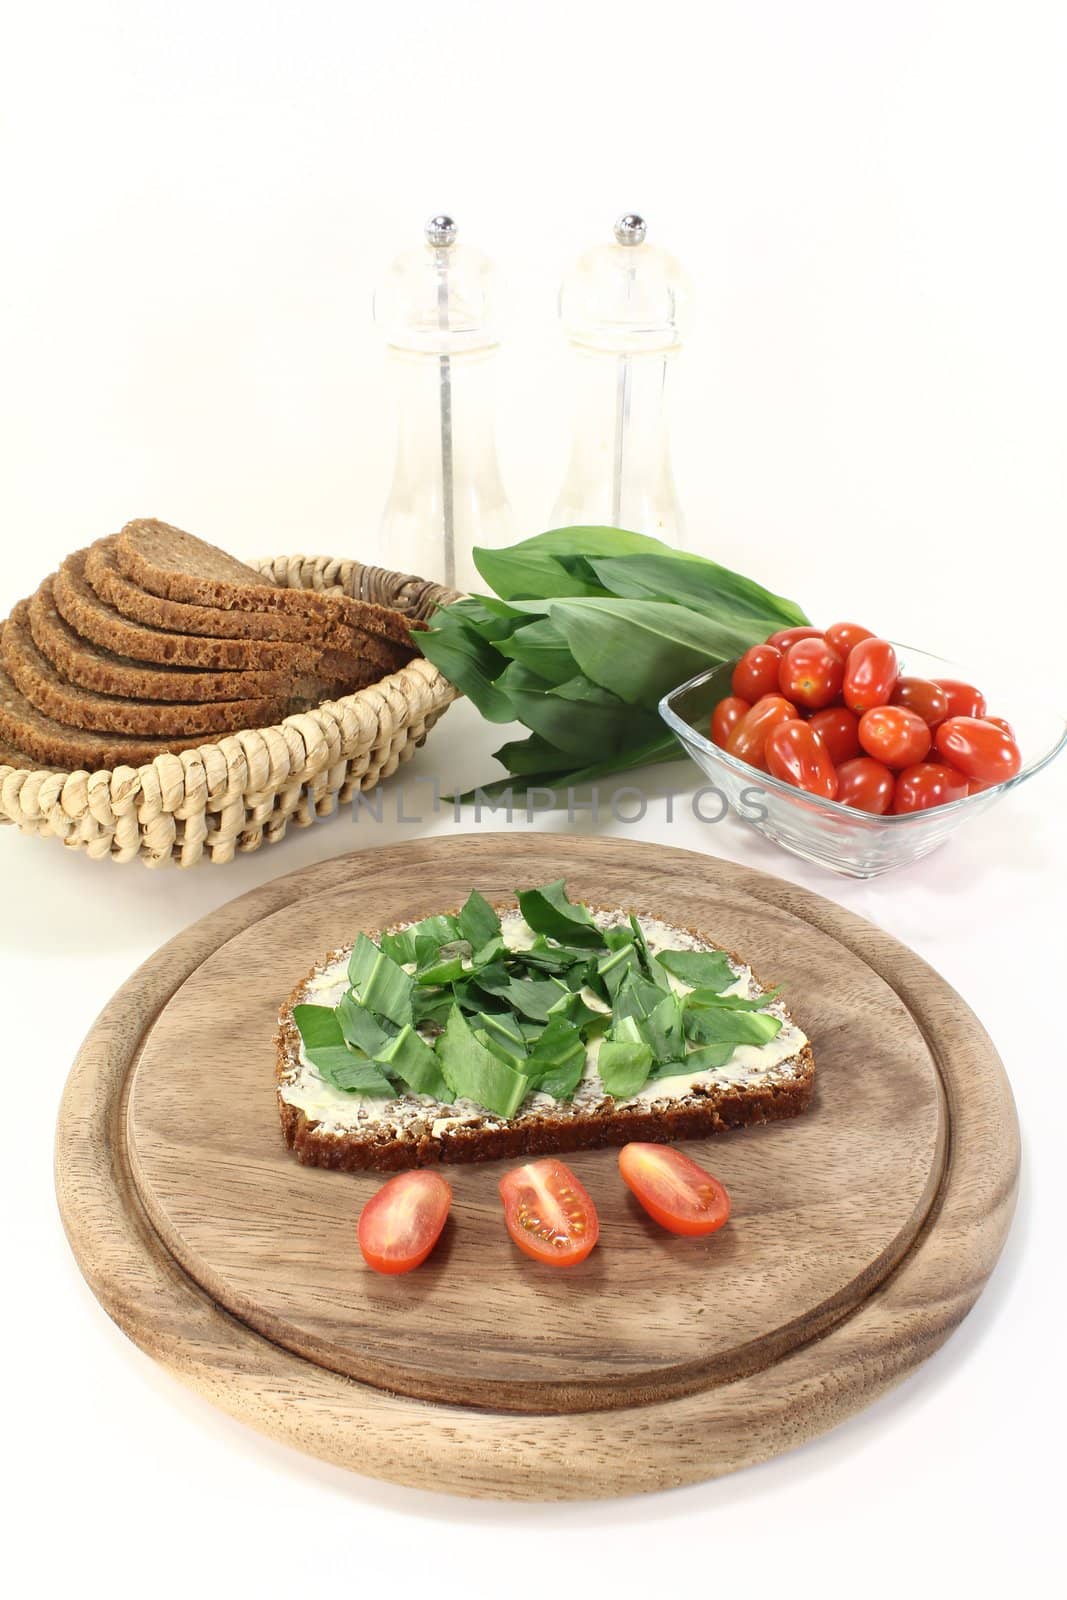 fresh ramson bread with butter, ramson and tomatoes on a light background